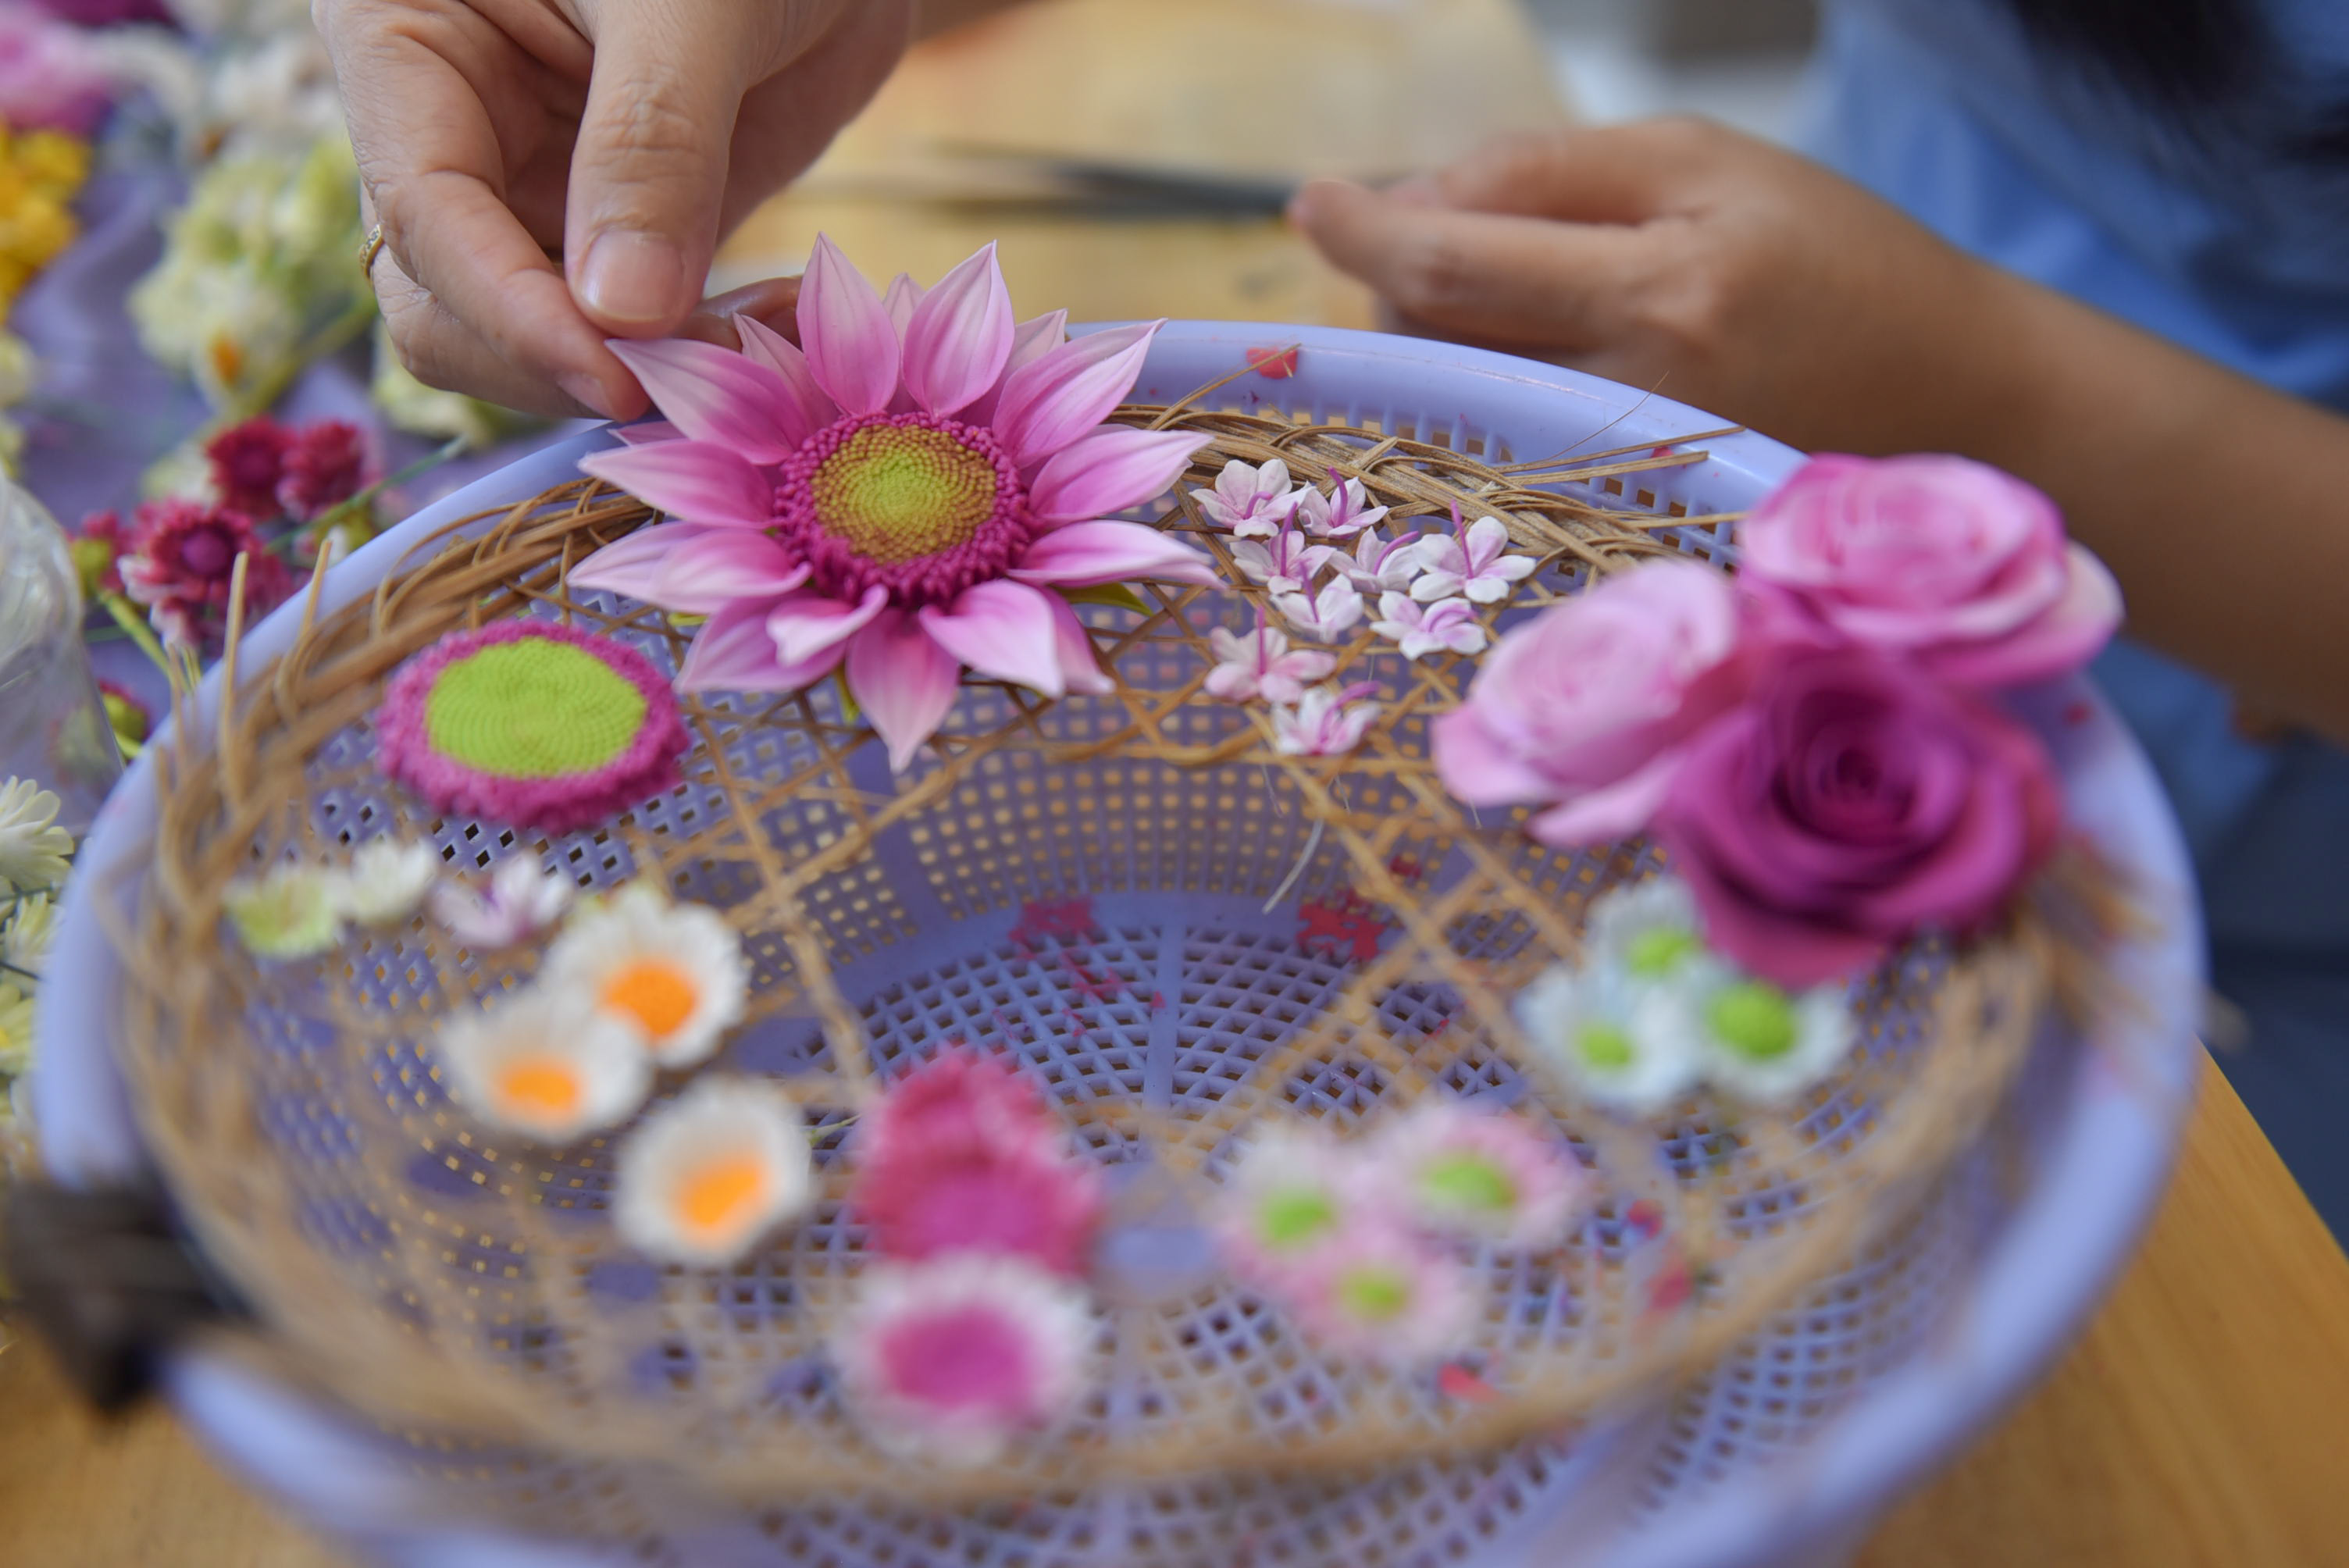 The flowers Giang Sinh uses are made from clay and then colored and glued onto the painting. Photo: Ngoc Phuong / Tuoi Tre News